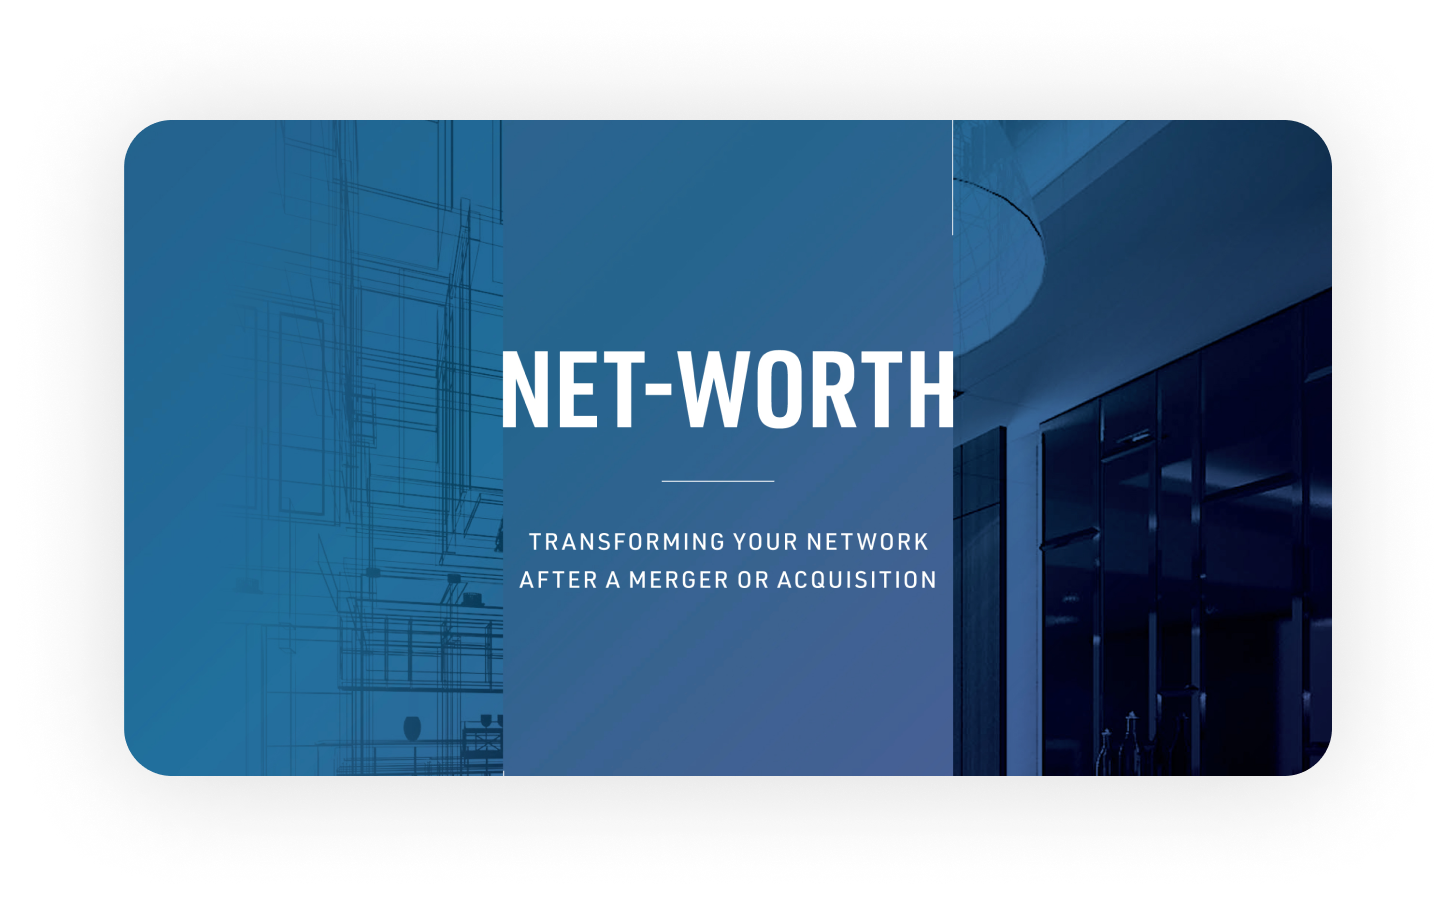 Net-Worth Transforming Your Network After A Merger or Acquisition